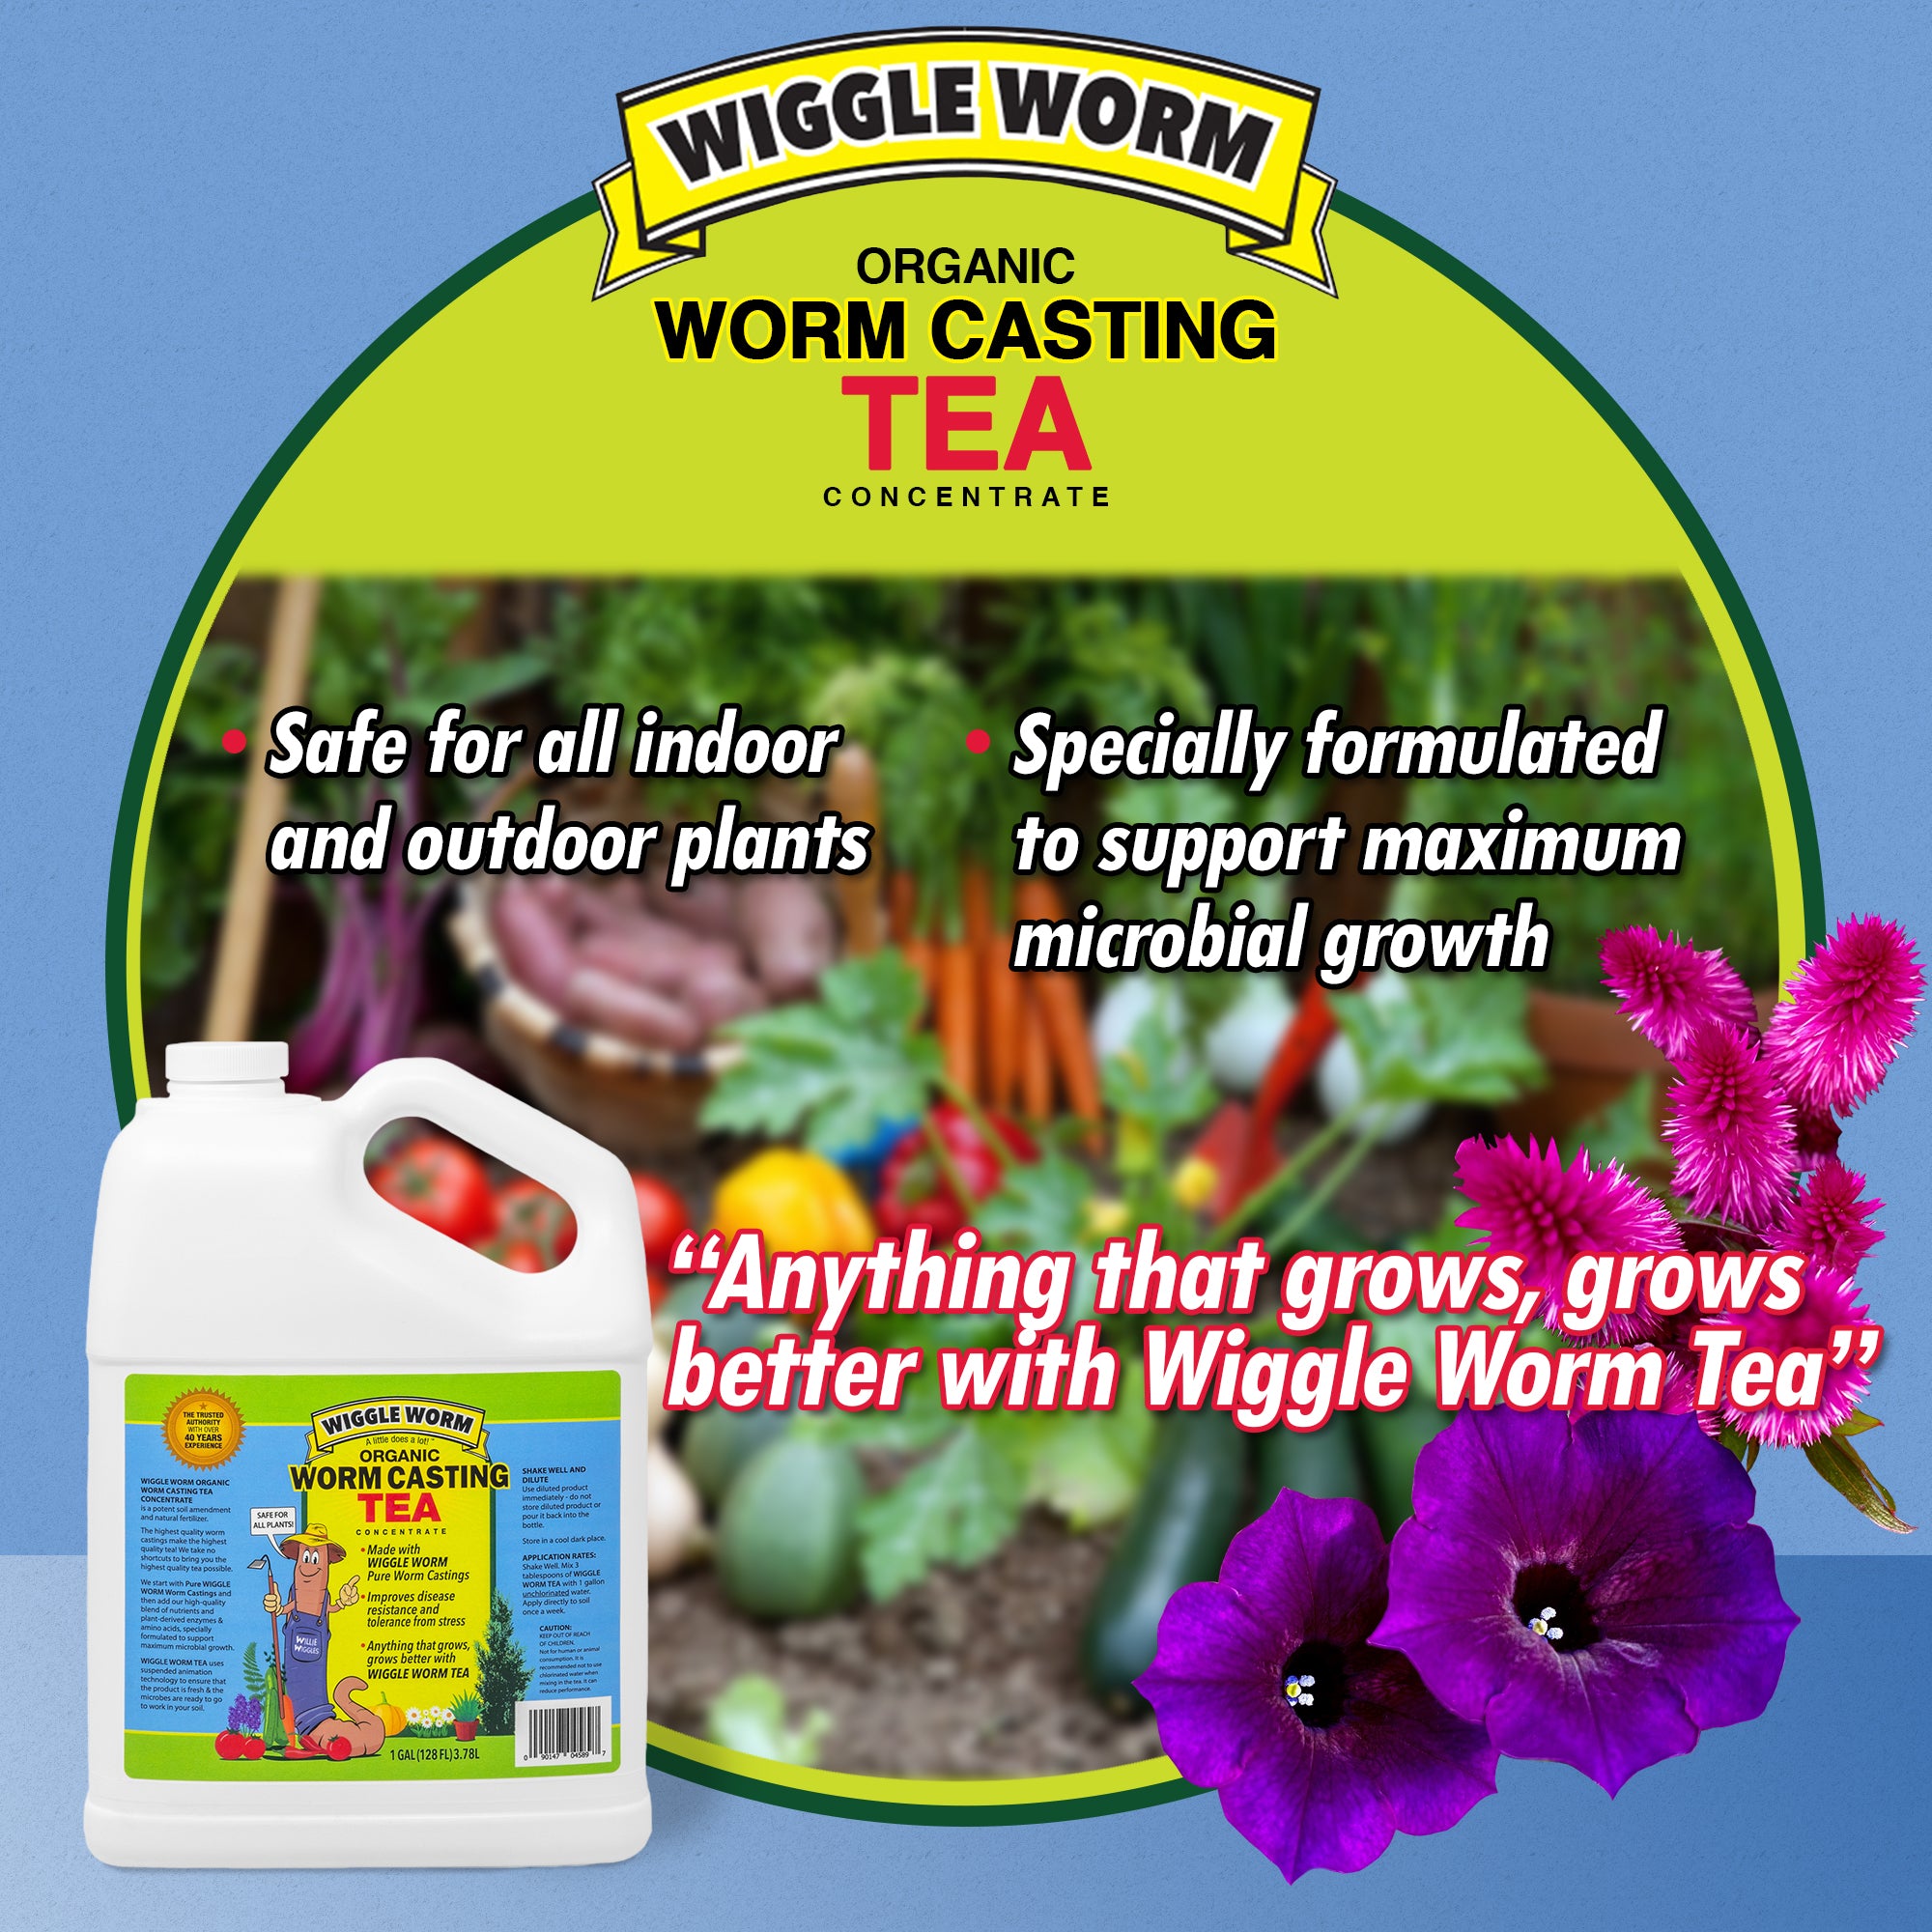 WIGGLE WORM Organic Pure Worm Castings Tea Plant Food Fertilizer For Gardens, Flowers, Indoor or Outdoor Plants